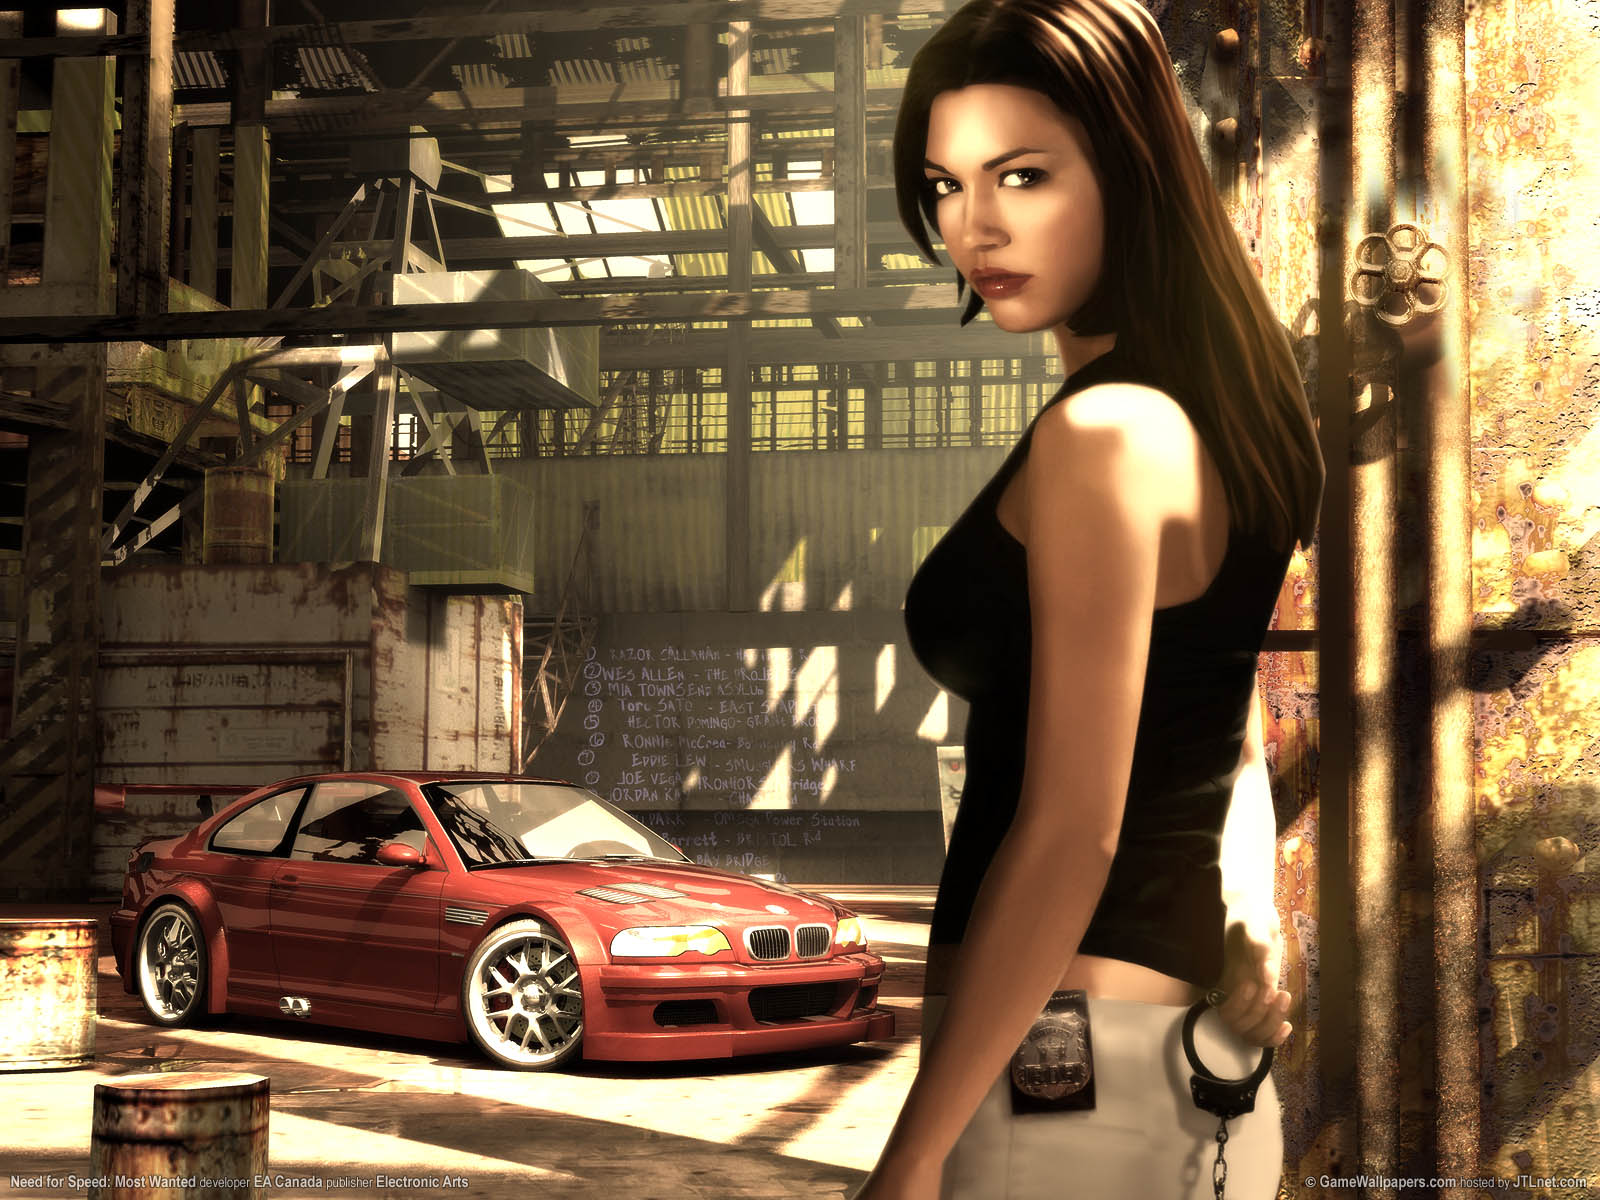 Need for Speed: Most Wanted fond d'cran 01 1600x1200